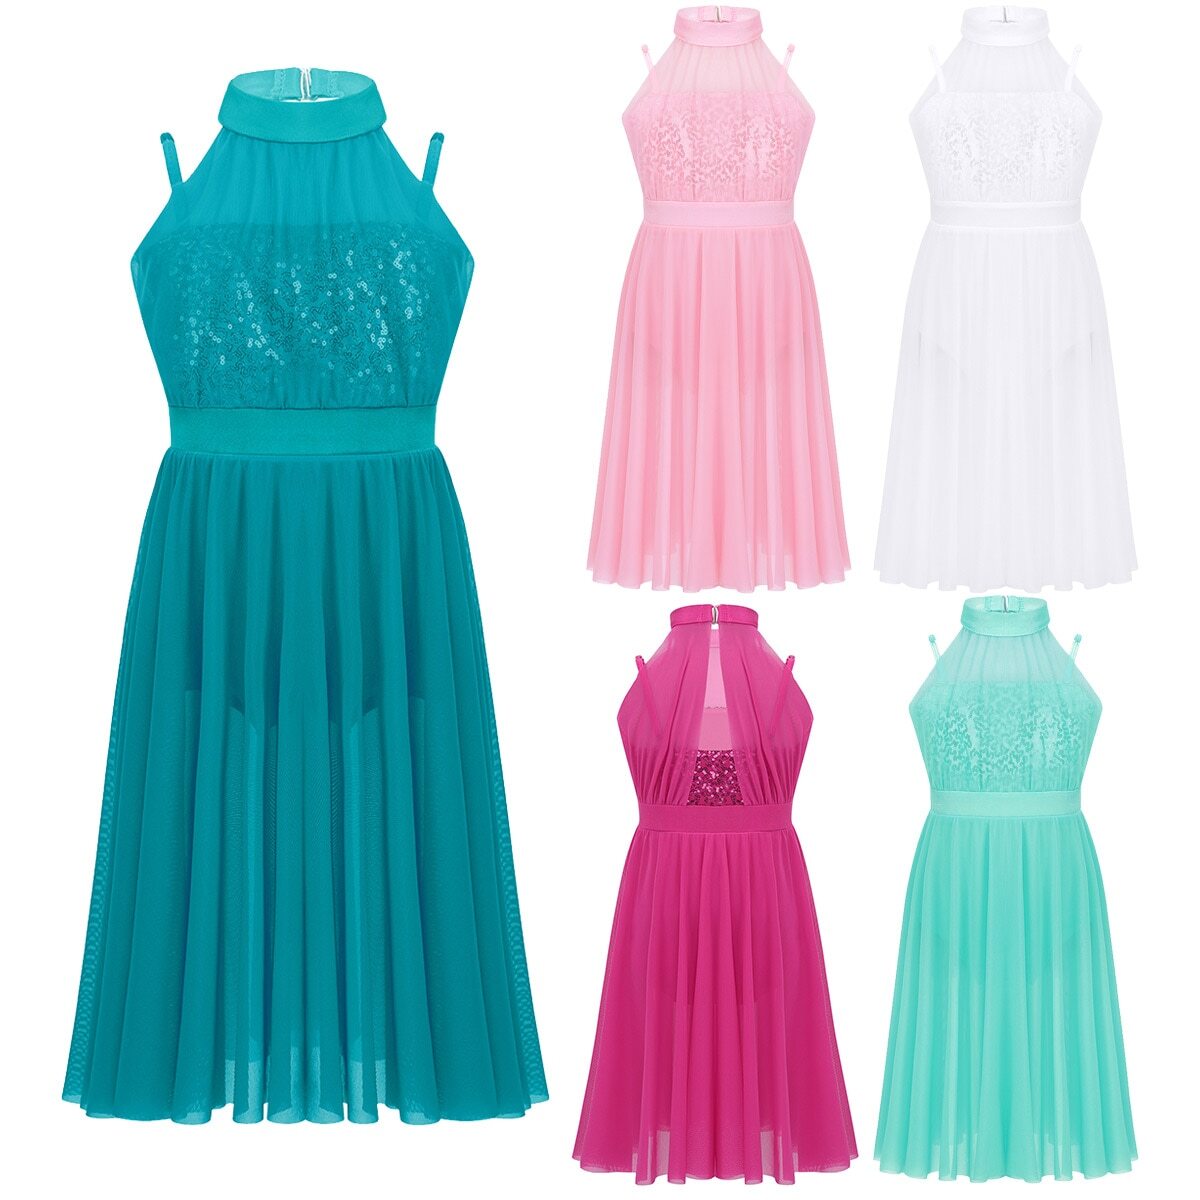 Dance outfits for girls in teal 6-14 year olds – Fabulous Bargains Galore